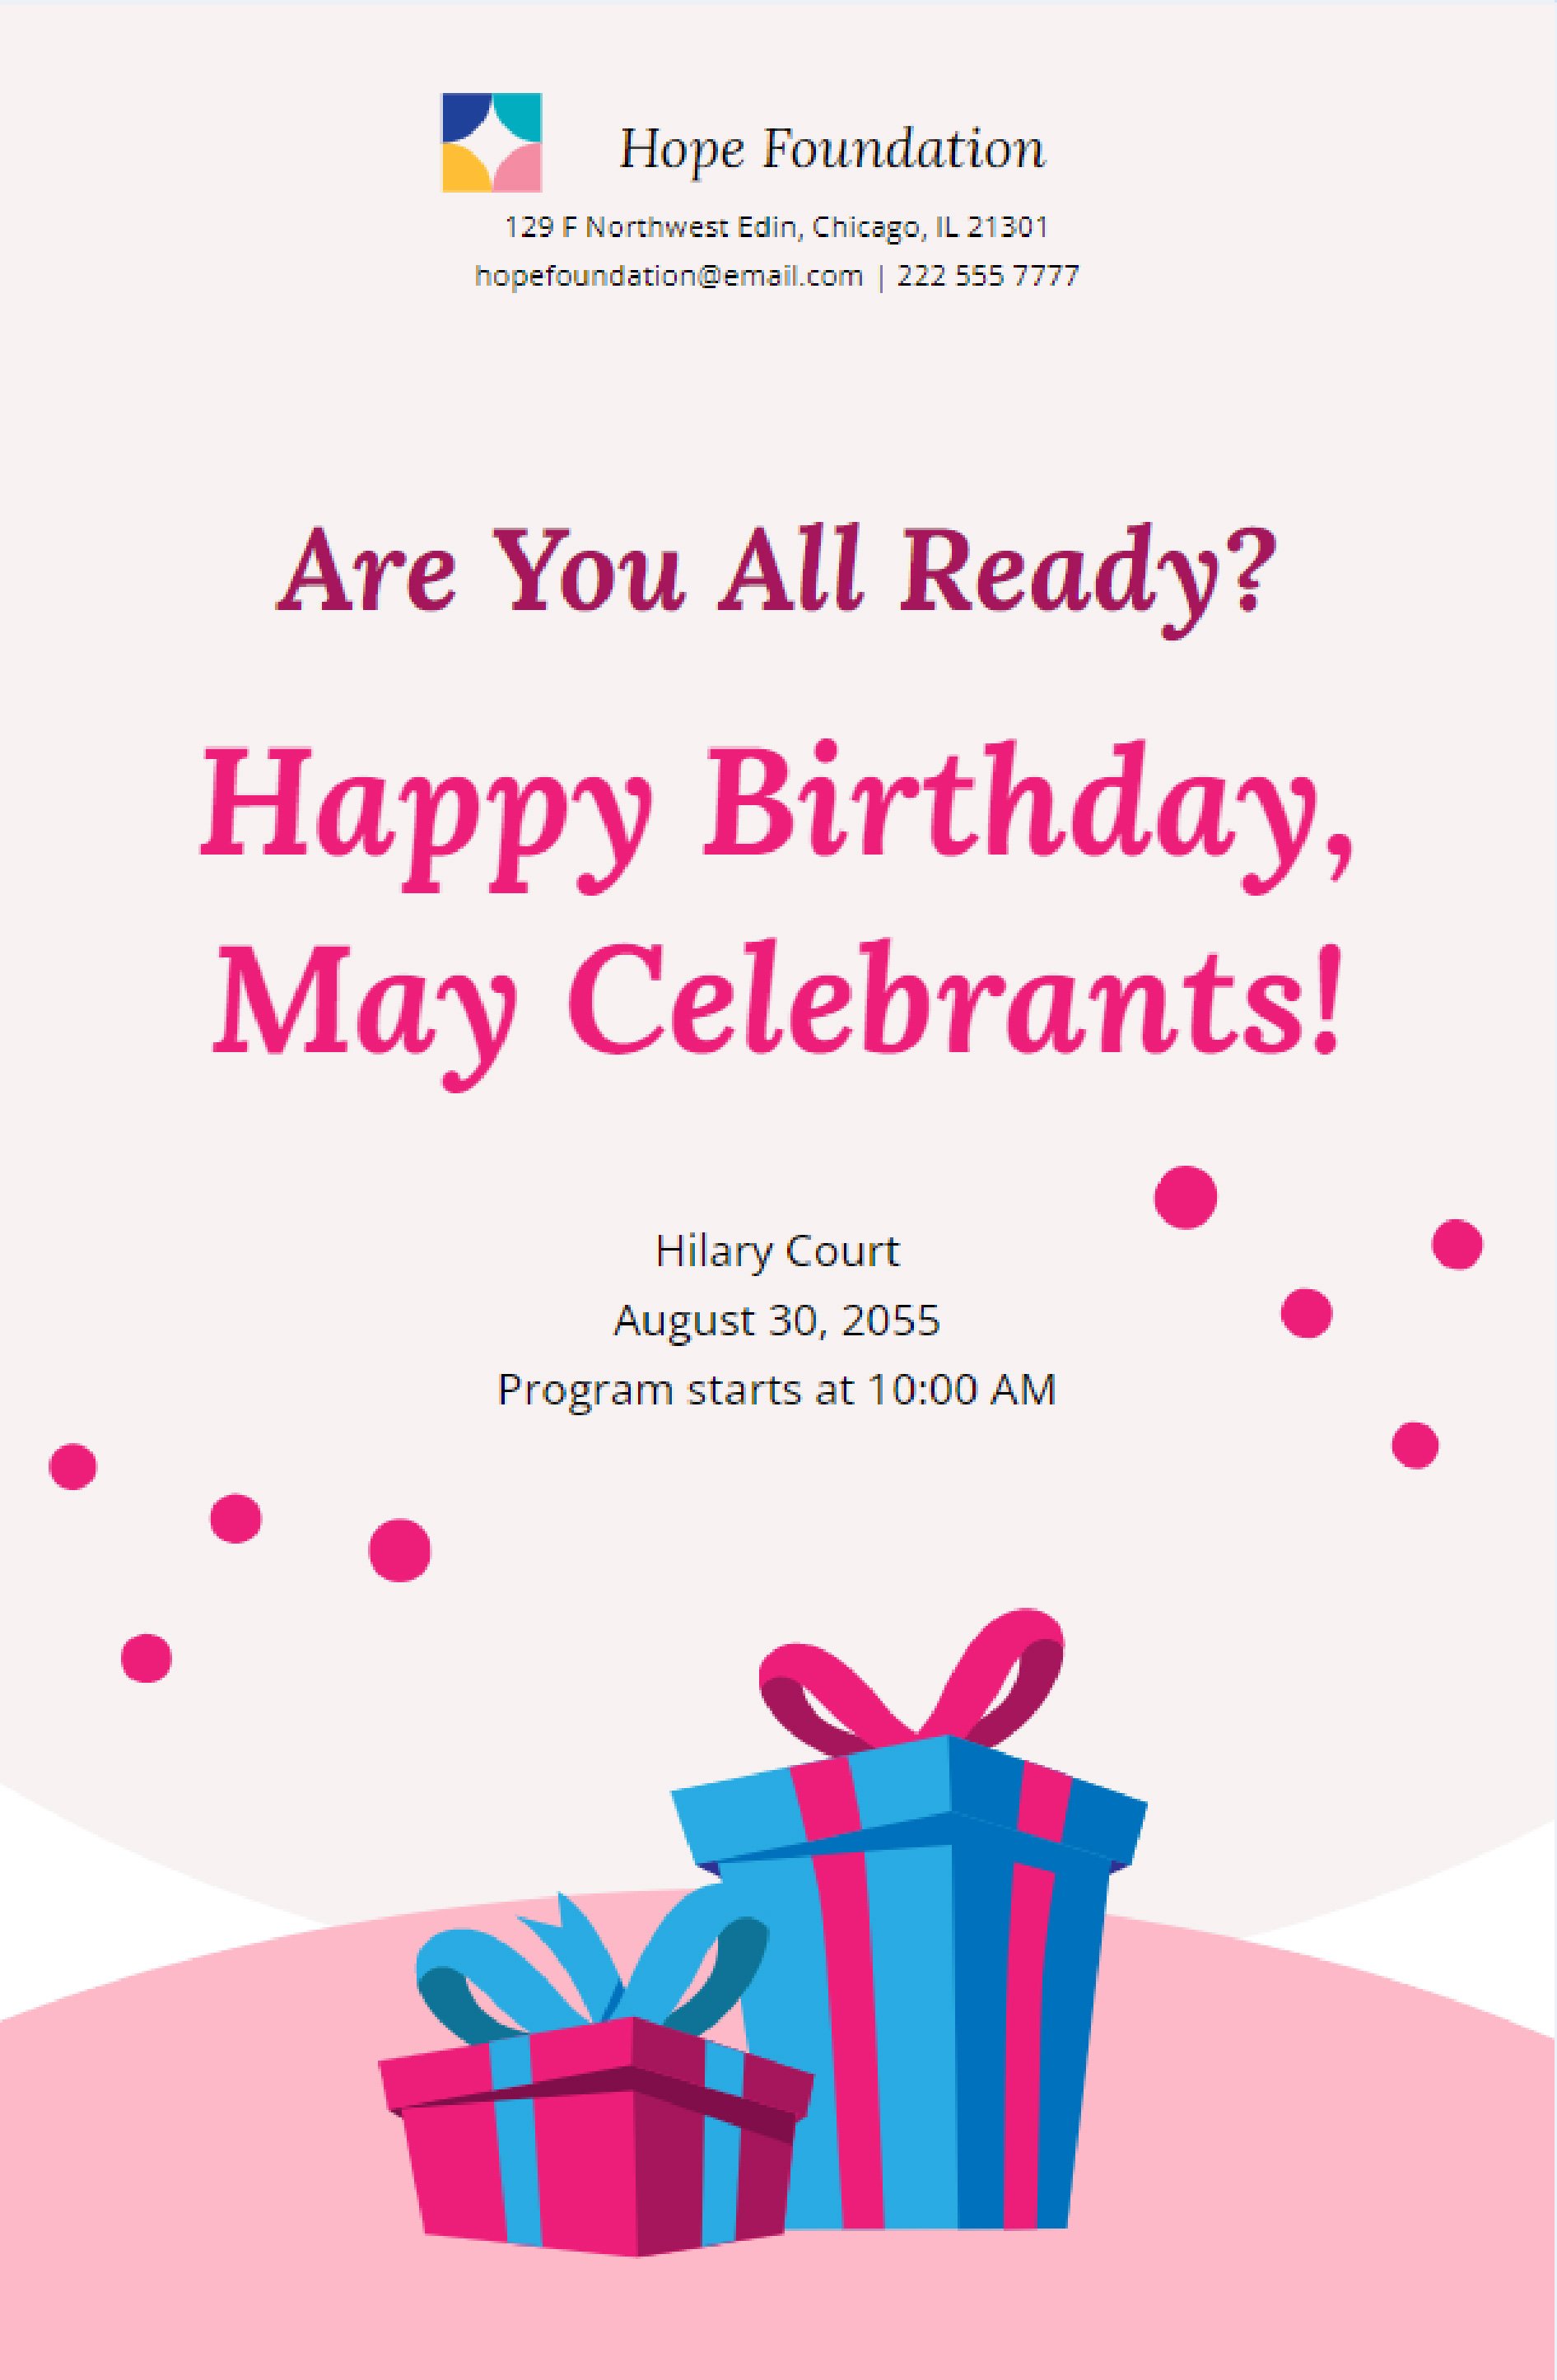 free-birthday-poster-template-download-in-word-illustrator-photoshop-apple-pages-publisher